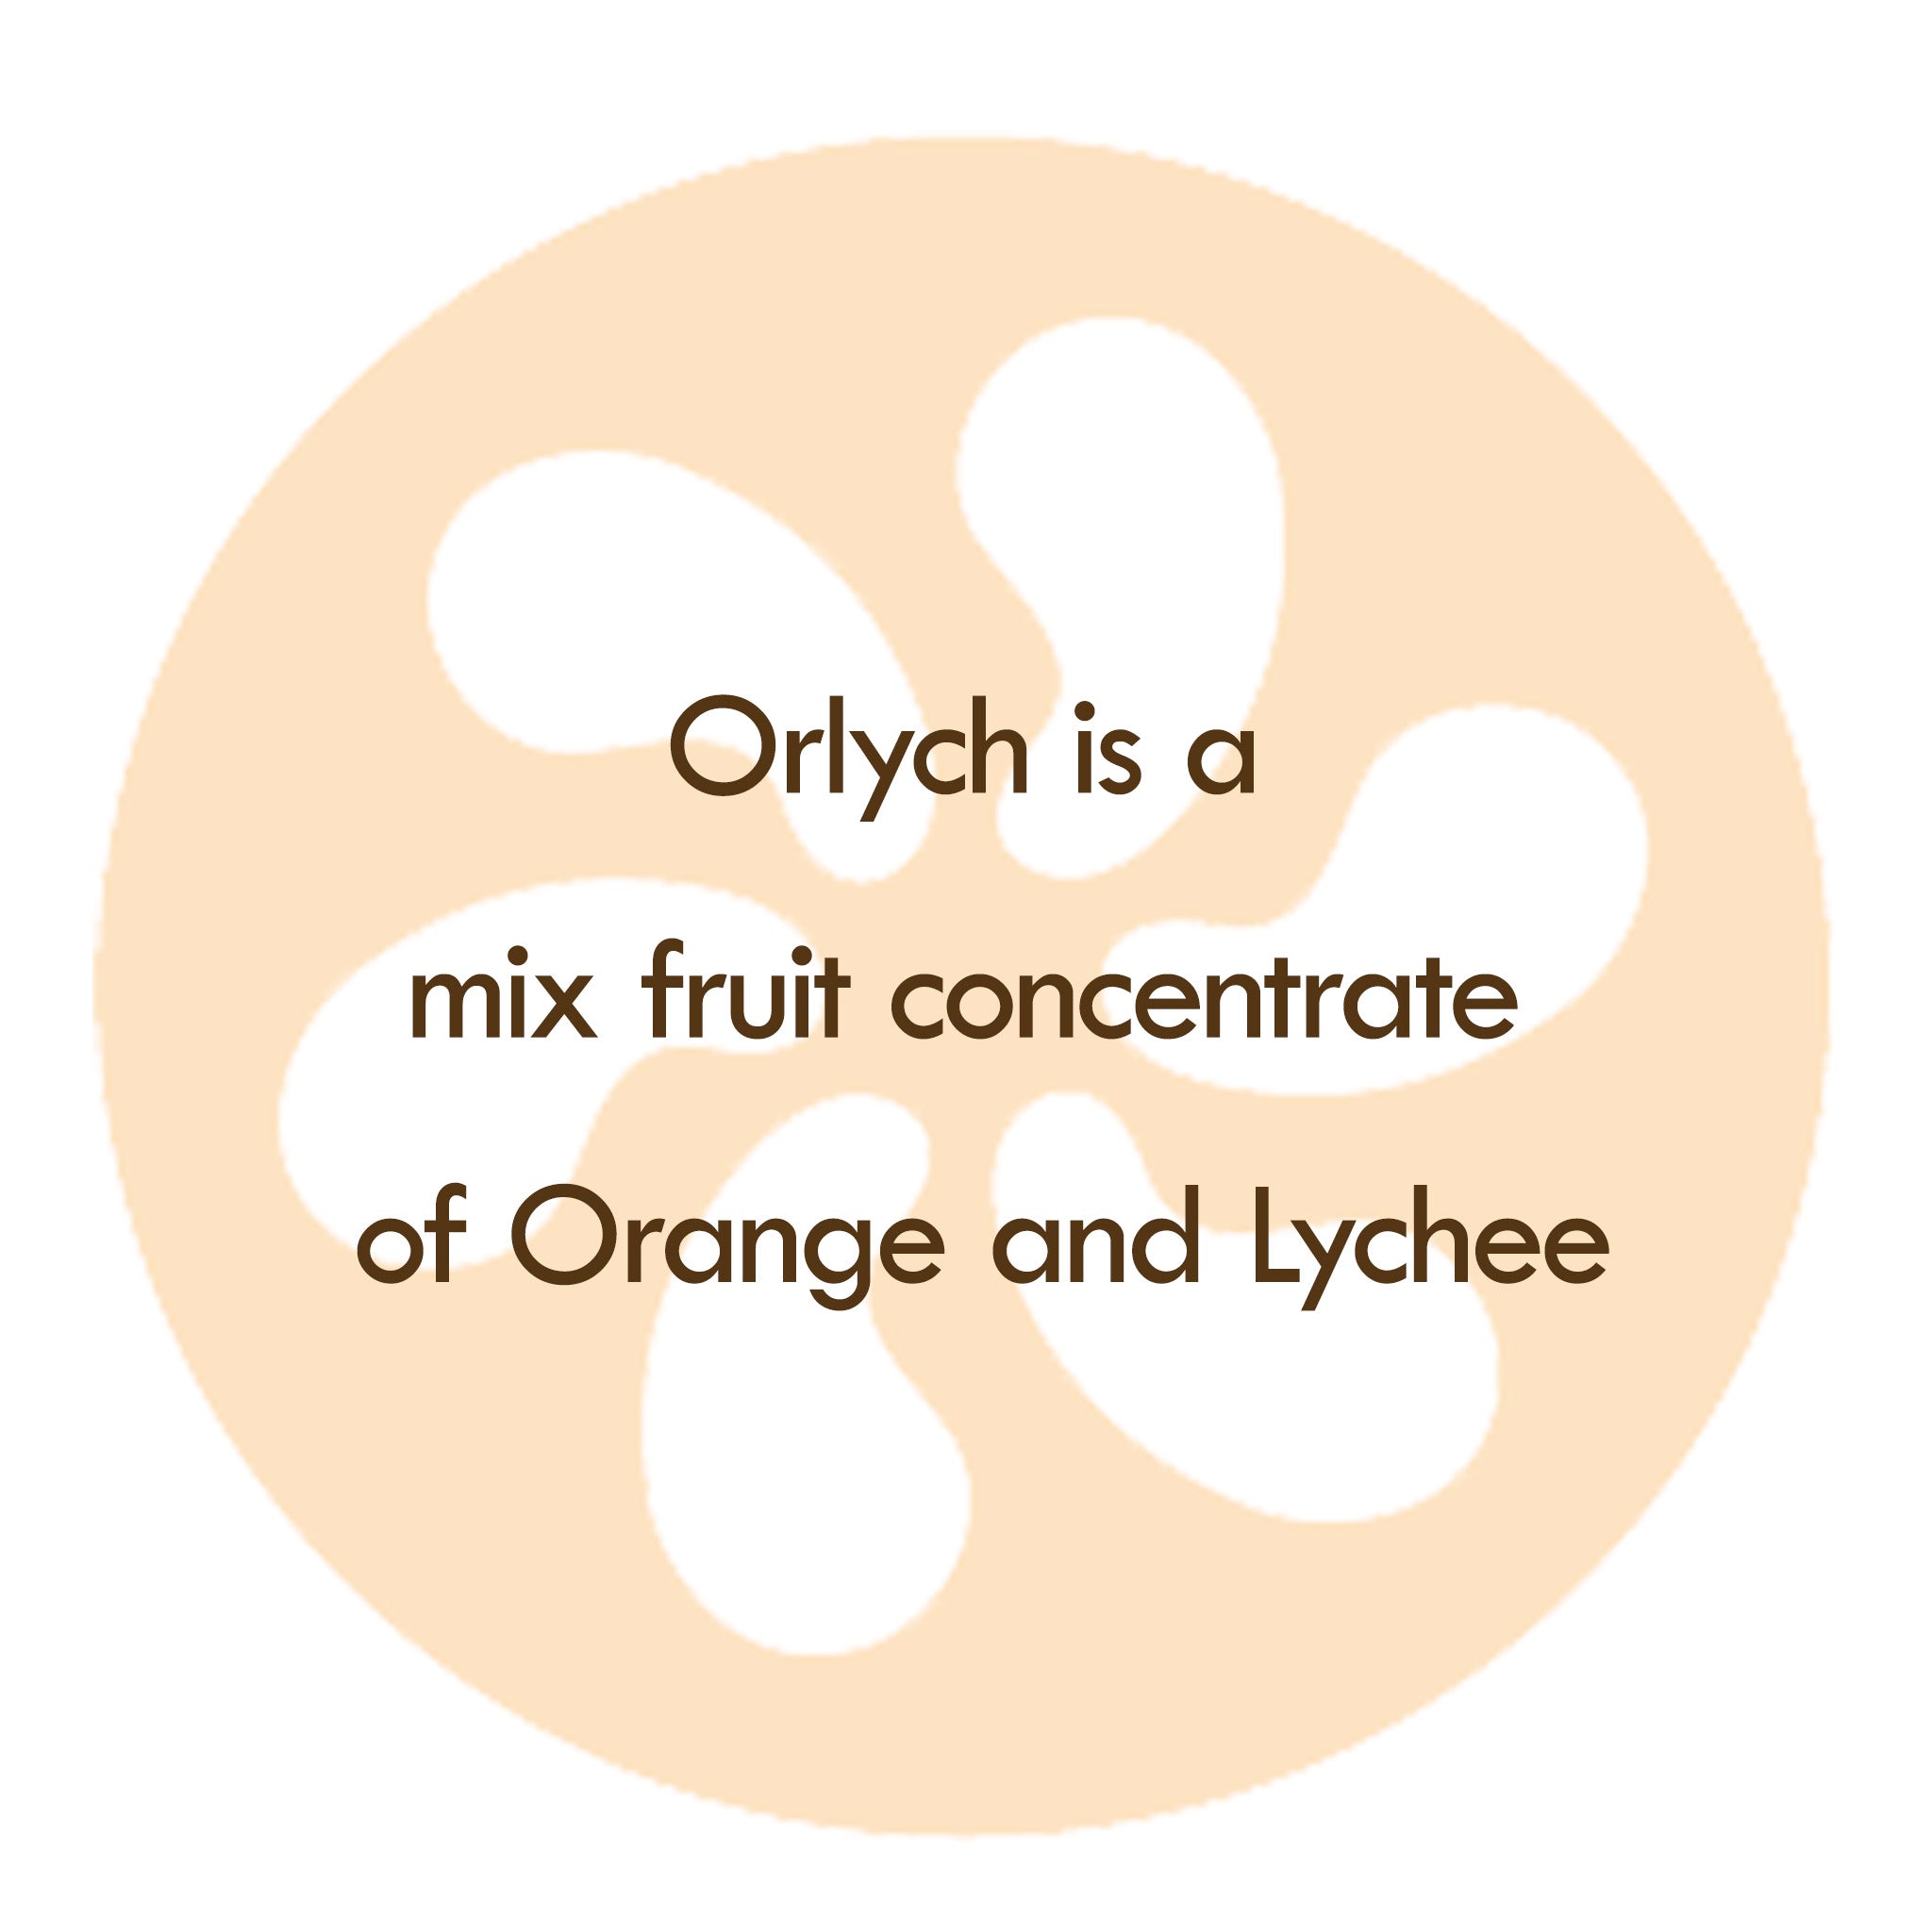 Our Orlych Mocktail is a concentrate of Orange and Lychee.